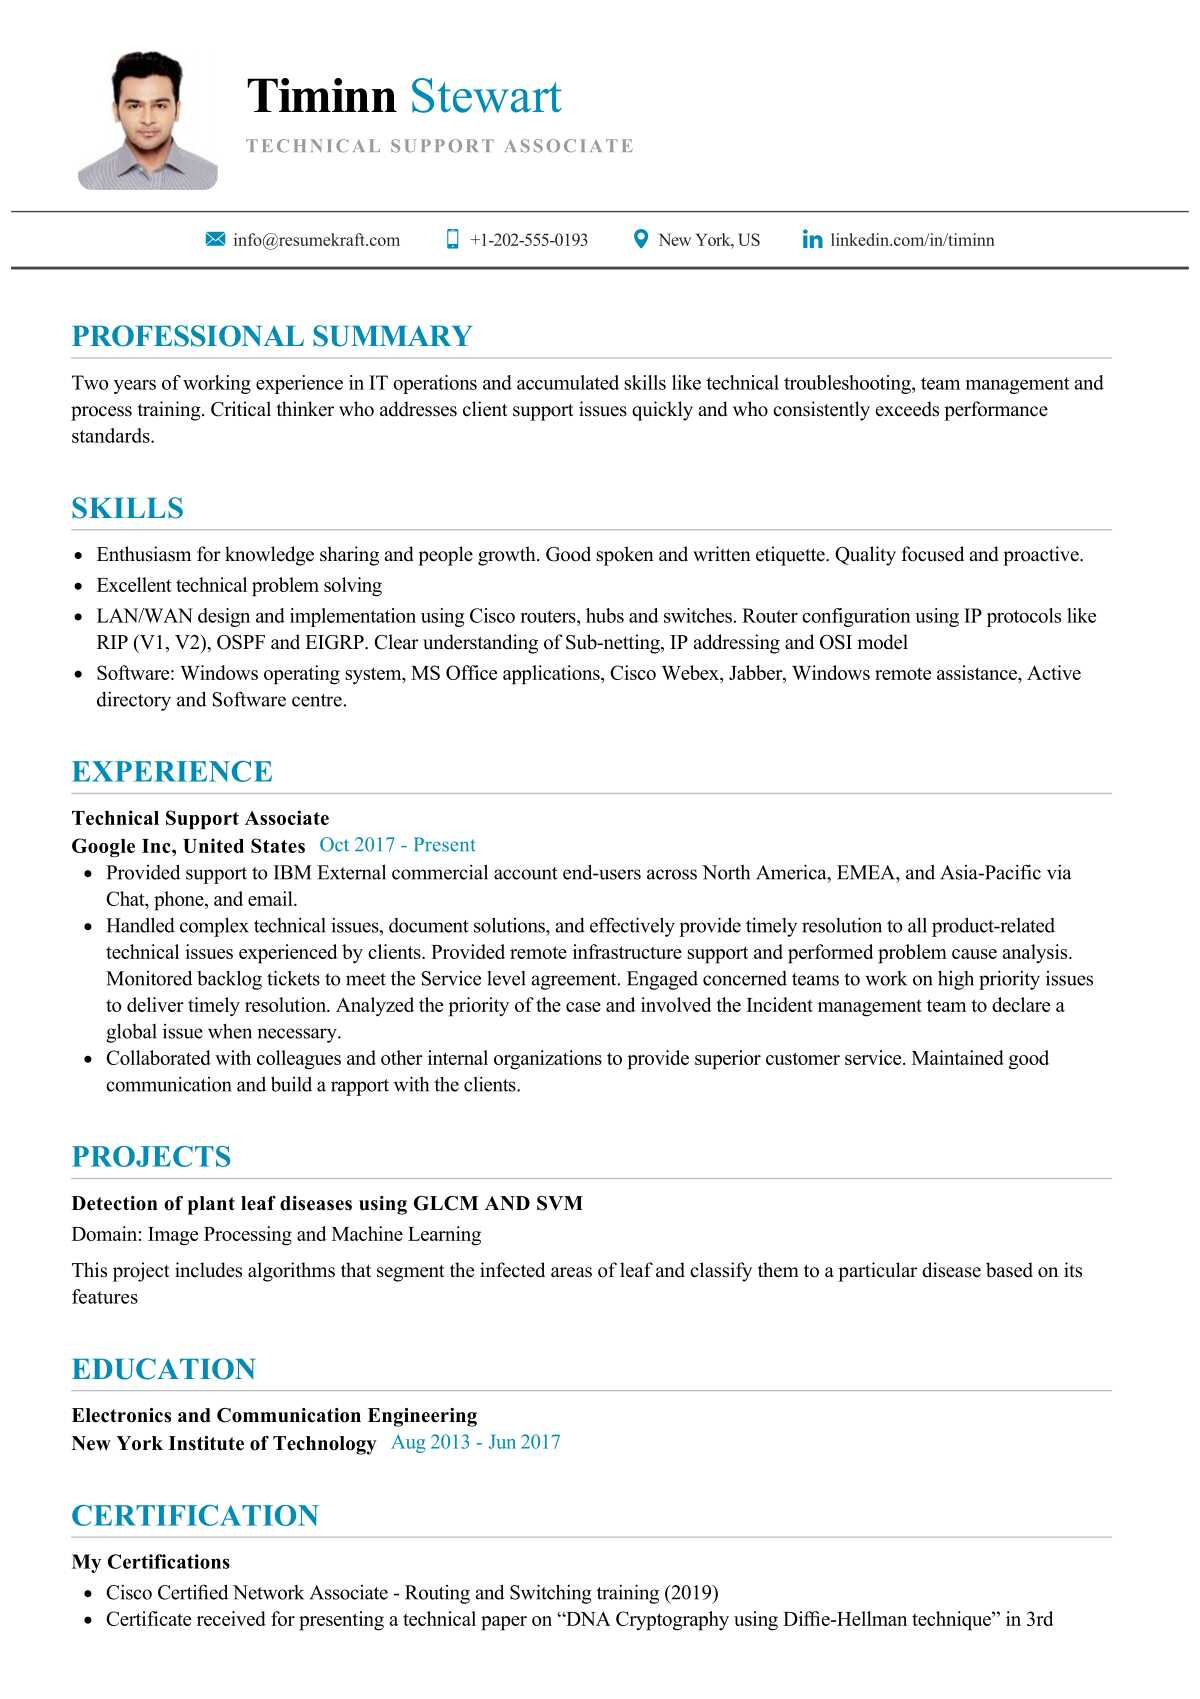 Professional Profile Sample for Resume It Technician assistance Technical Support associate Resume Sample 2022 Writing Tips …